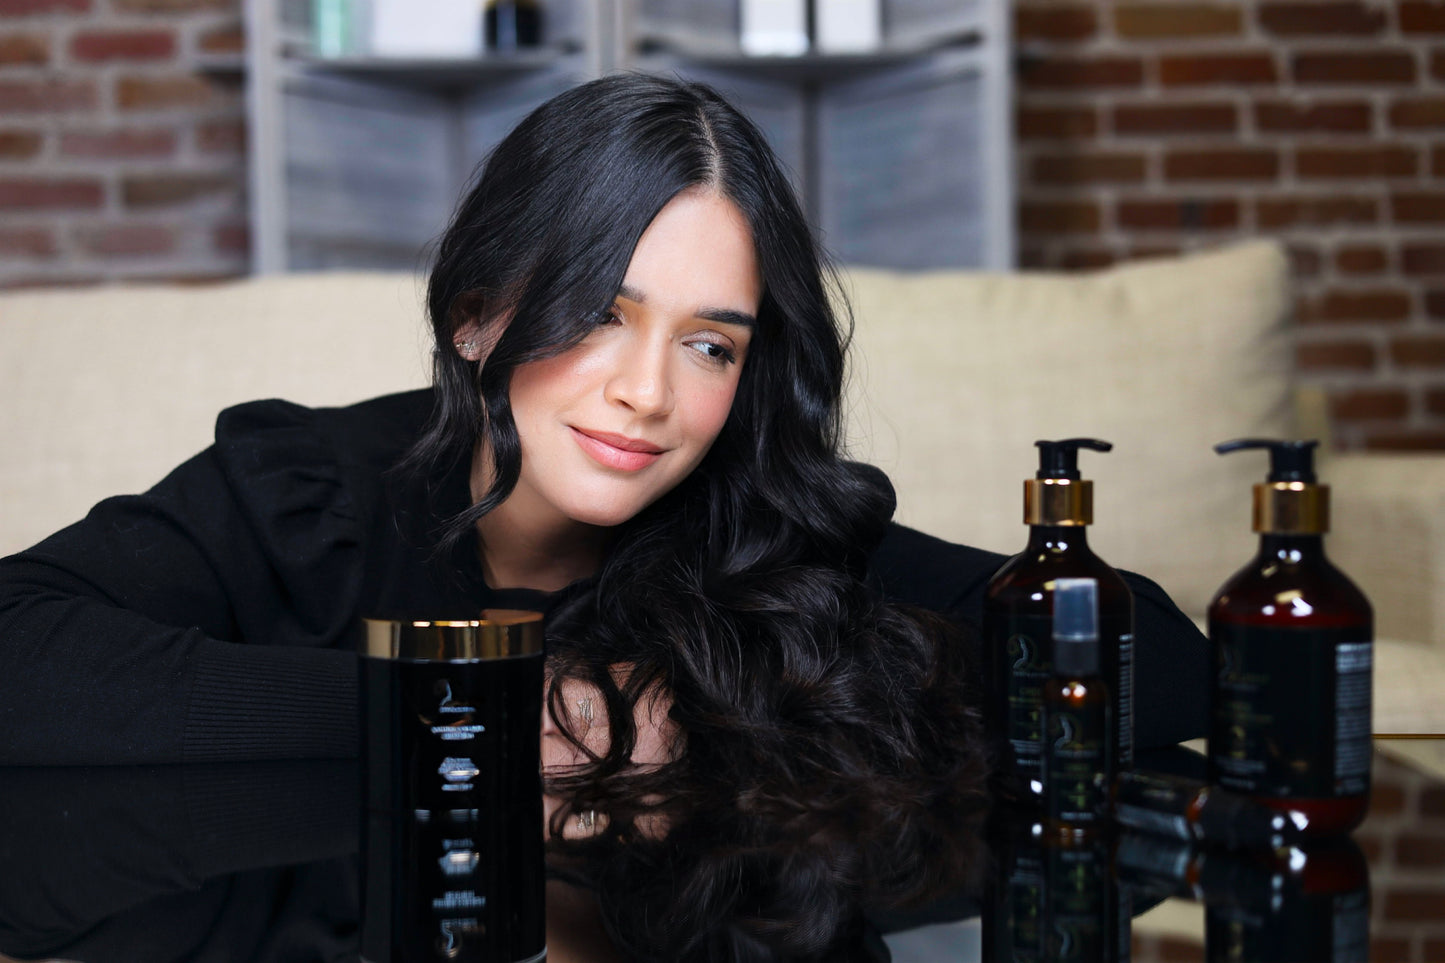 Growth Kit: Shampoo, Conditioner, Essential Oil and Spray